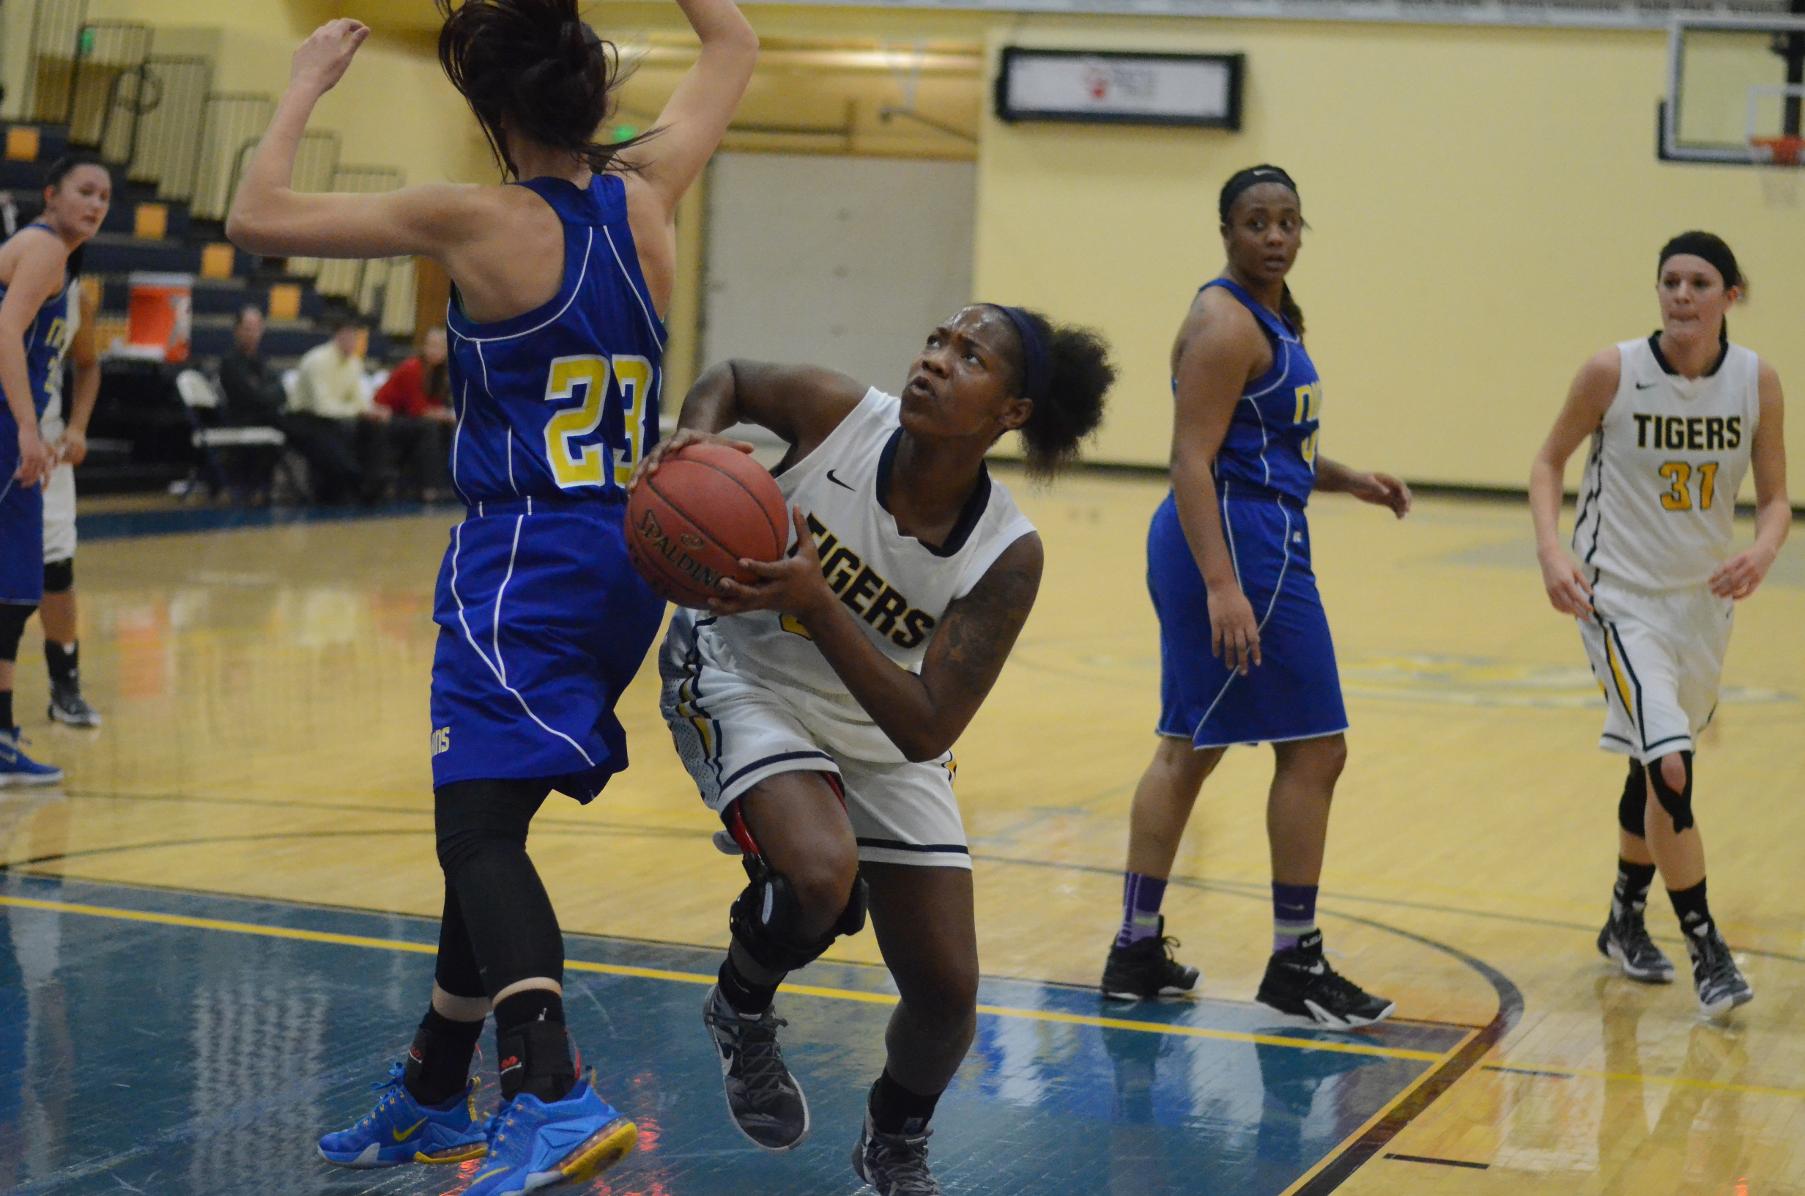 Women's basketball suffers 65-51 loss at Iowa Central